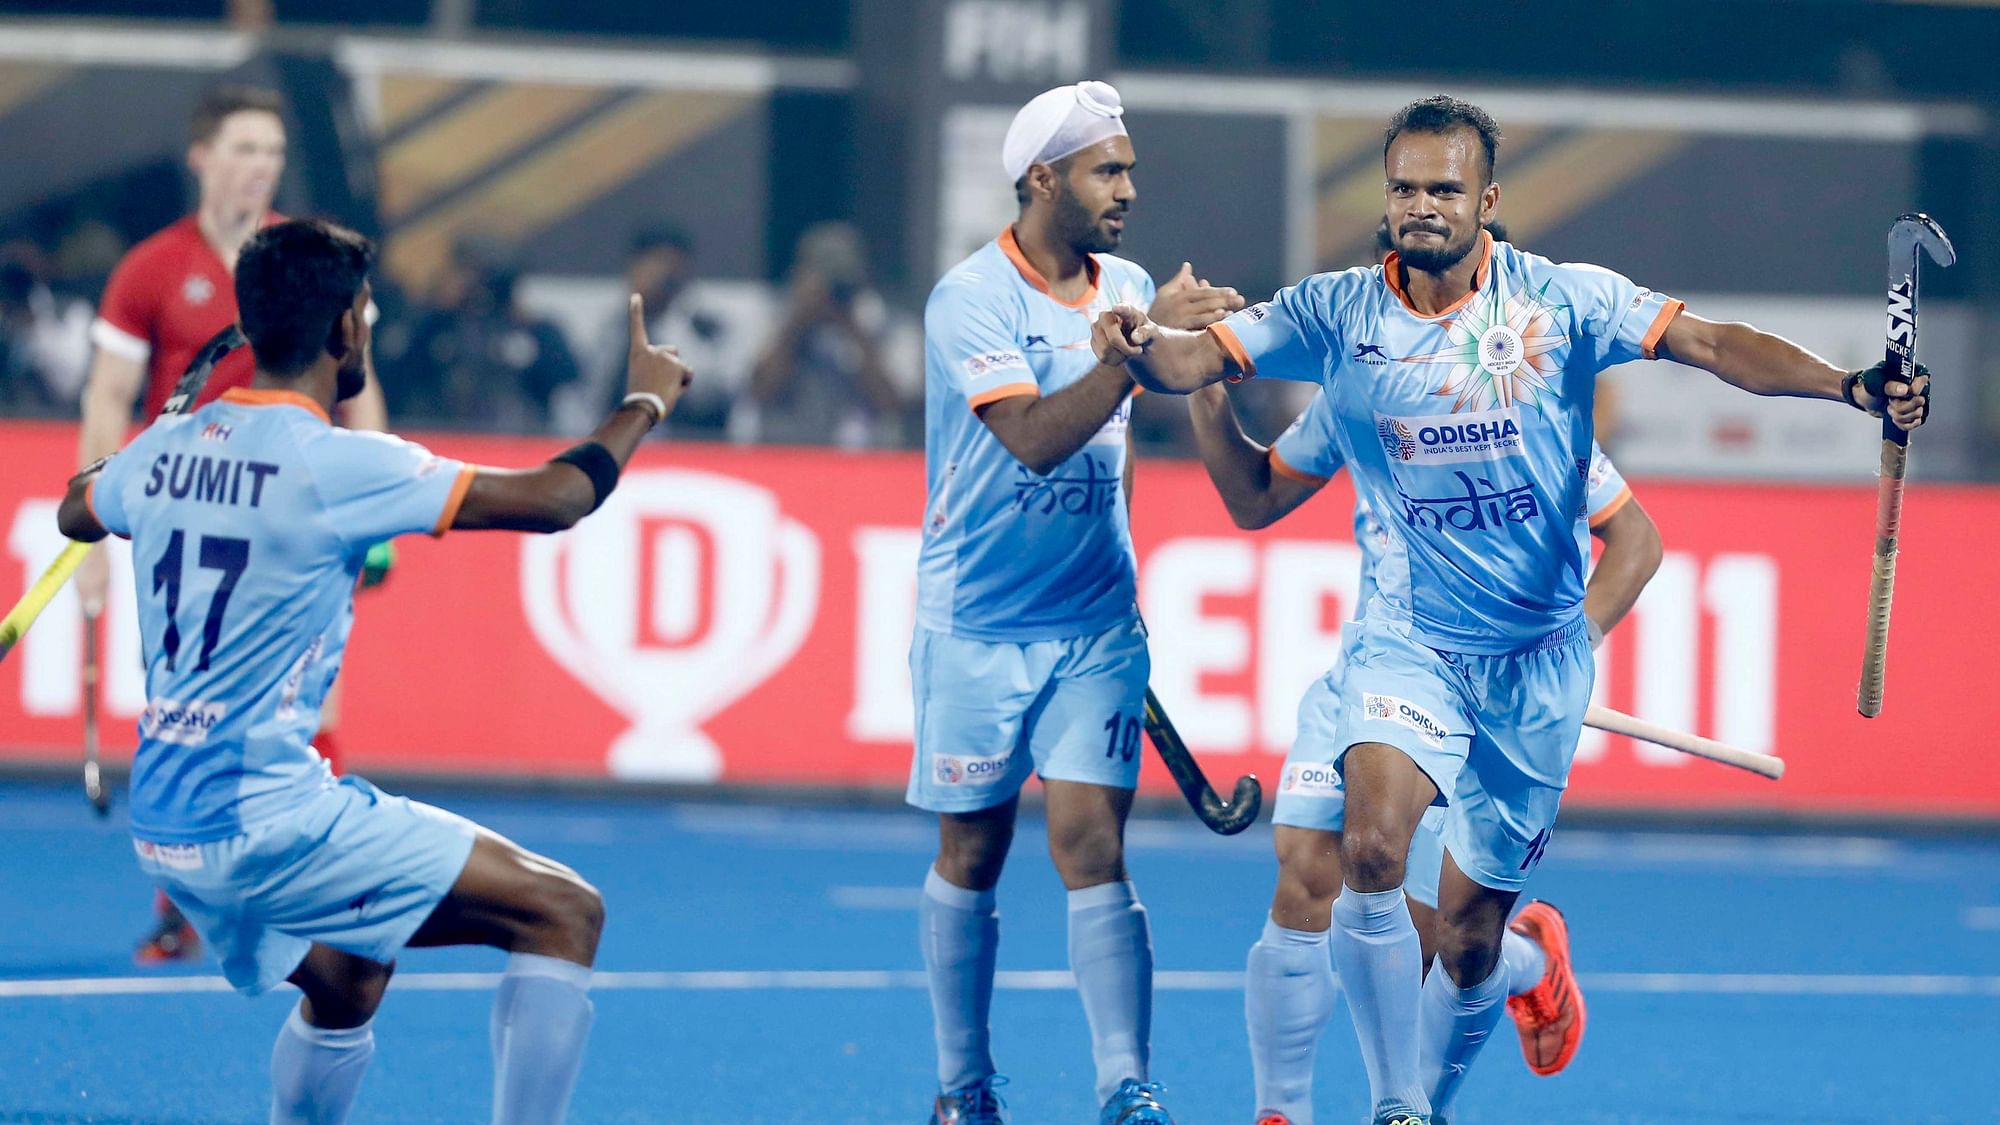 India secure direct entry in the quarter-finals of the men’s hockey World Cup after defeating Canada 5-1.